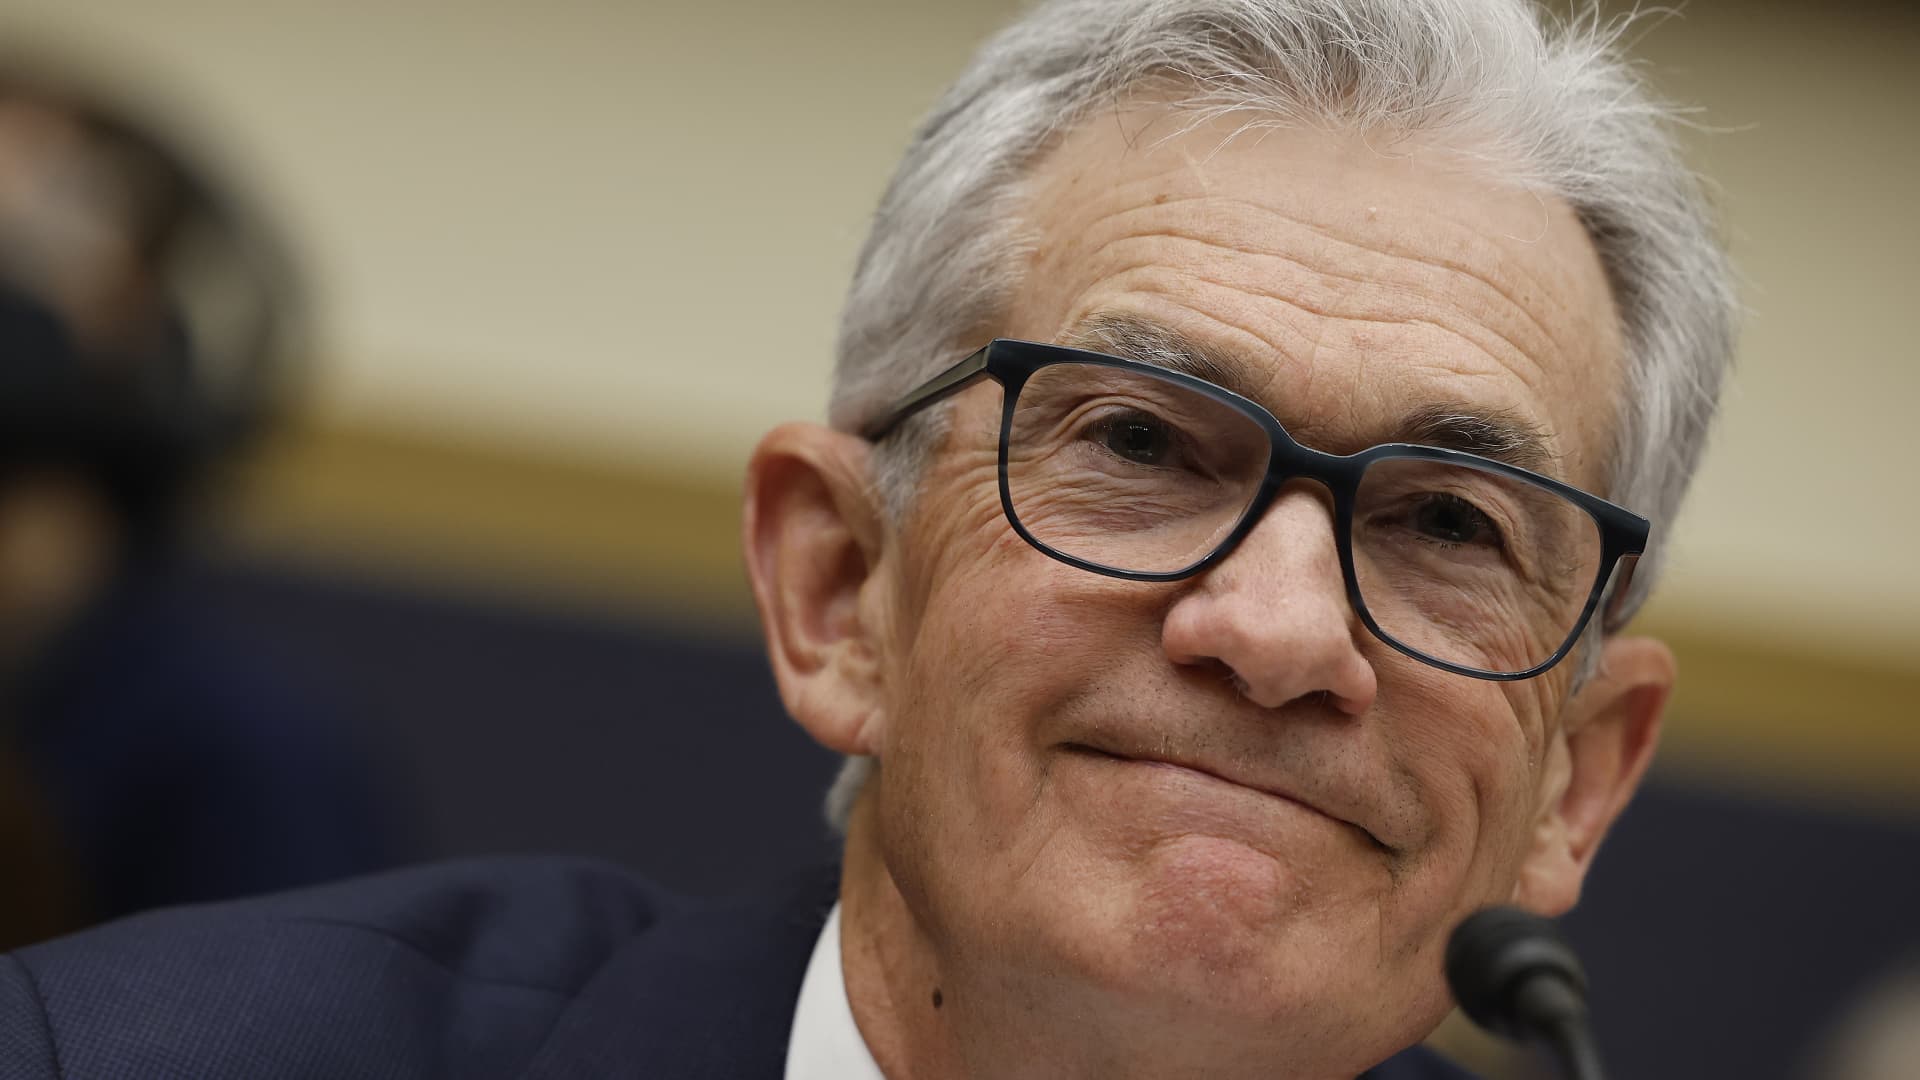 Watch Fed Chair Powell speak live during a policy forum in Washington [Video]